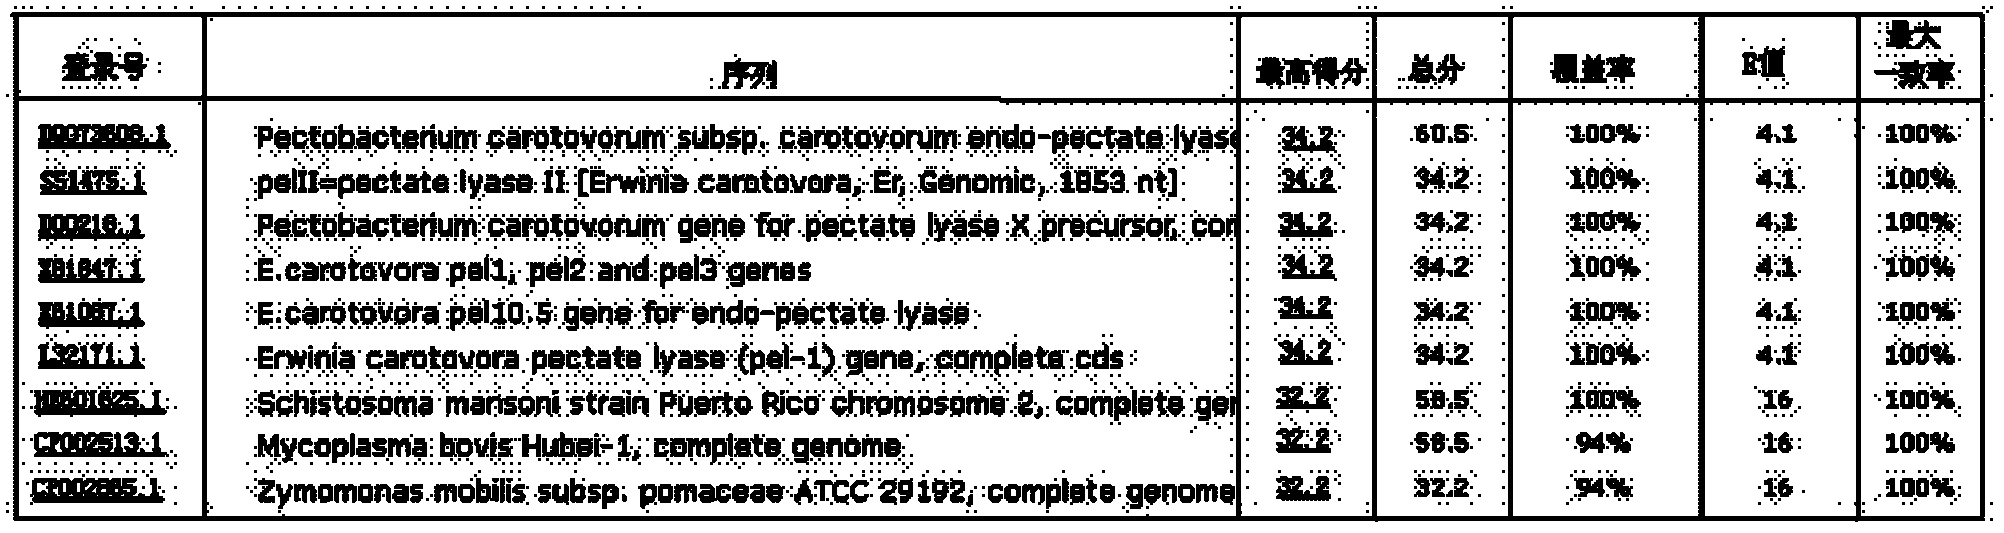 Polymerase chain reaction (PCR) method for specifically detecting pectobacterium carotovorum